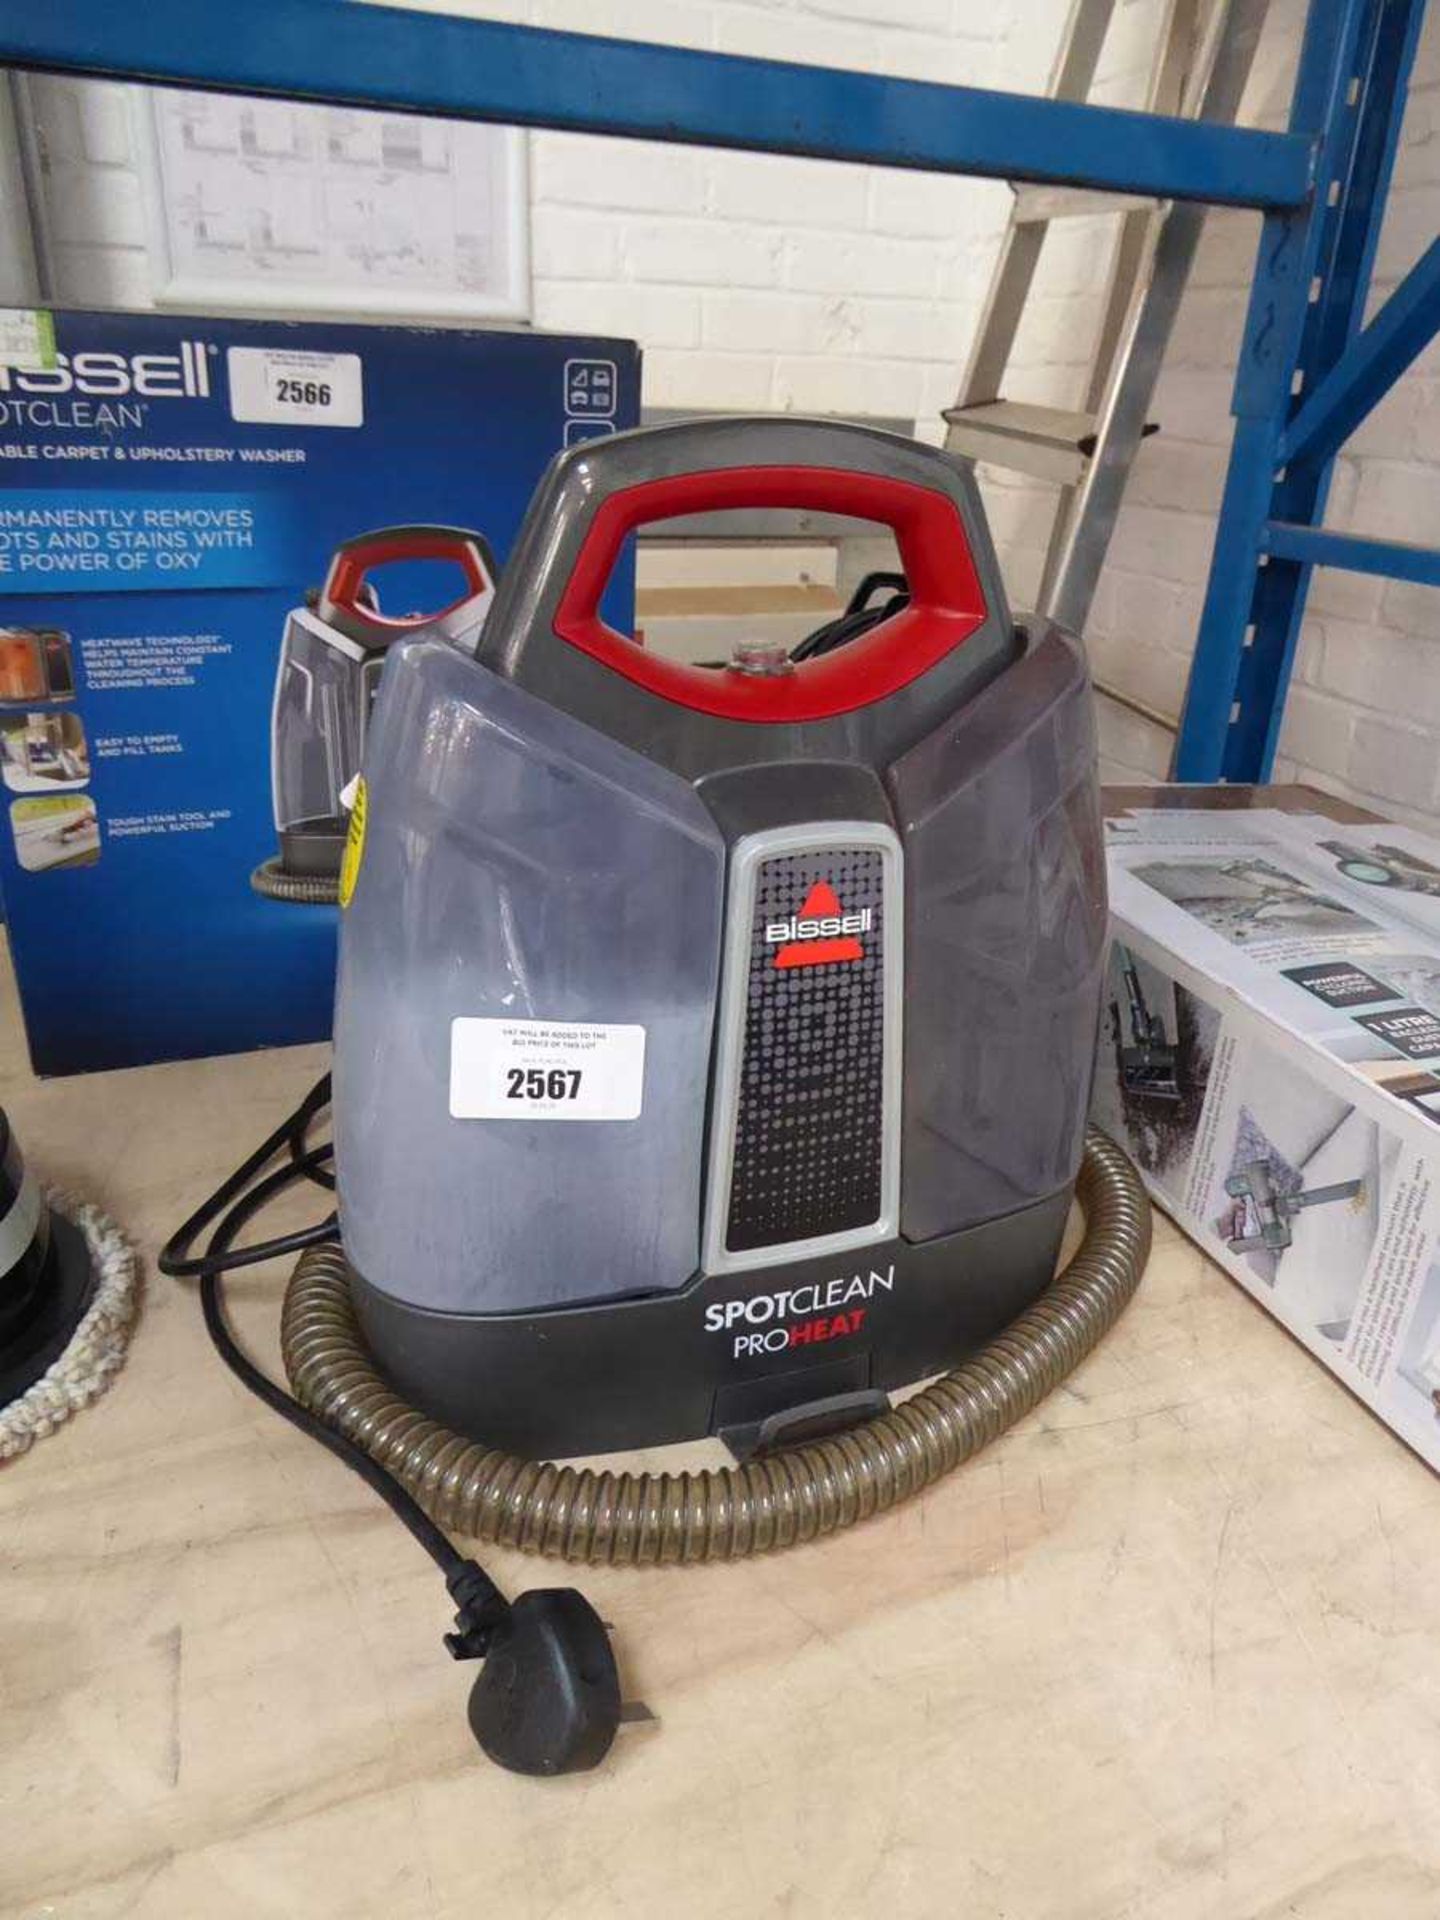 +VAT Bissell SpotClean ProHeat portable carpet and upholstery washer